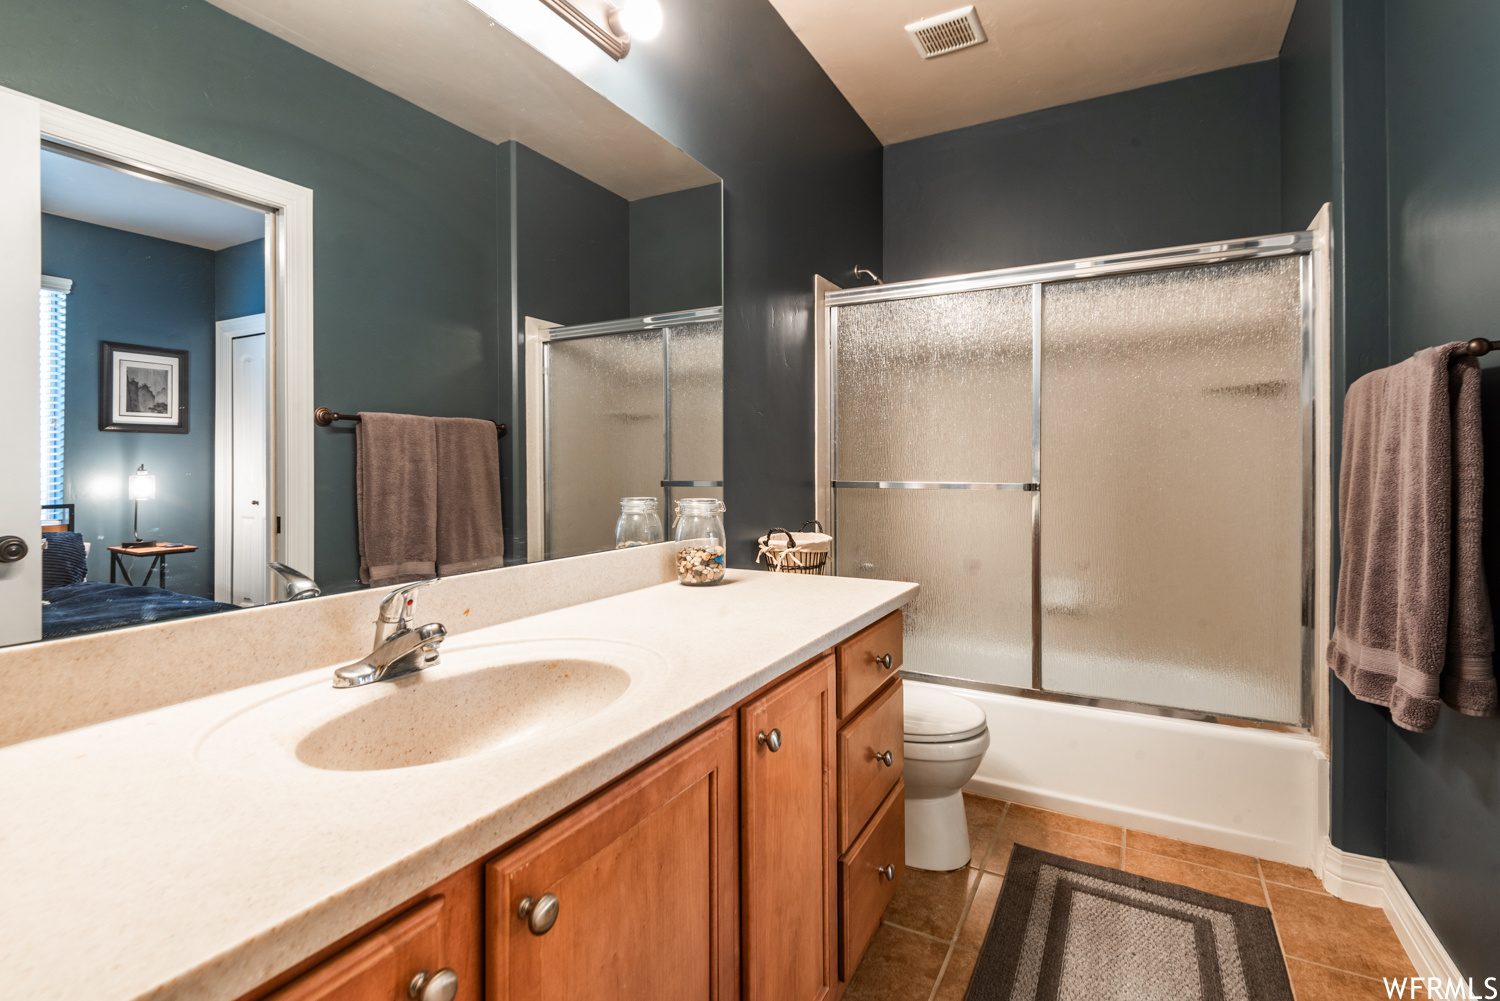 Full bathroom with toilet, combined bath / shower with glass door, tile floors, and large vanity